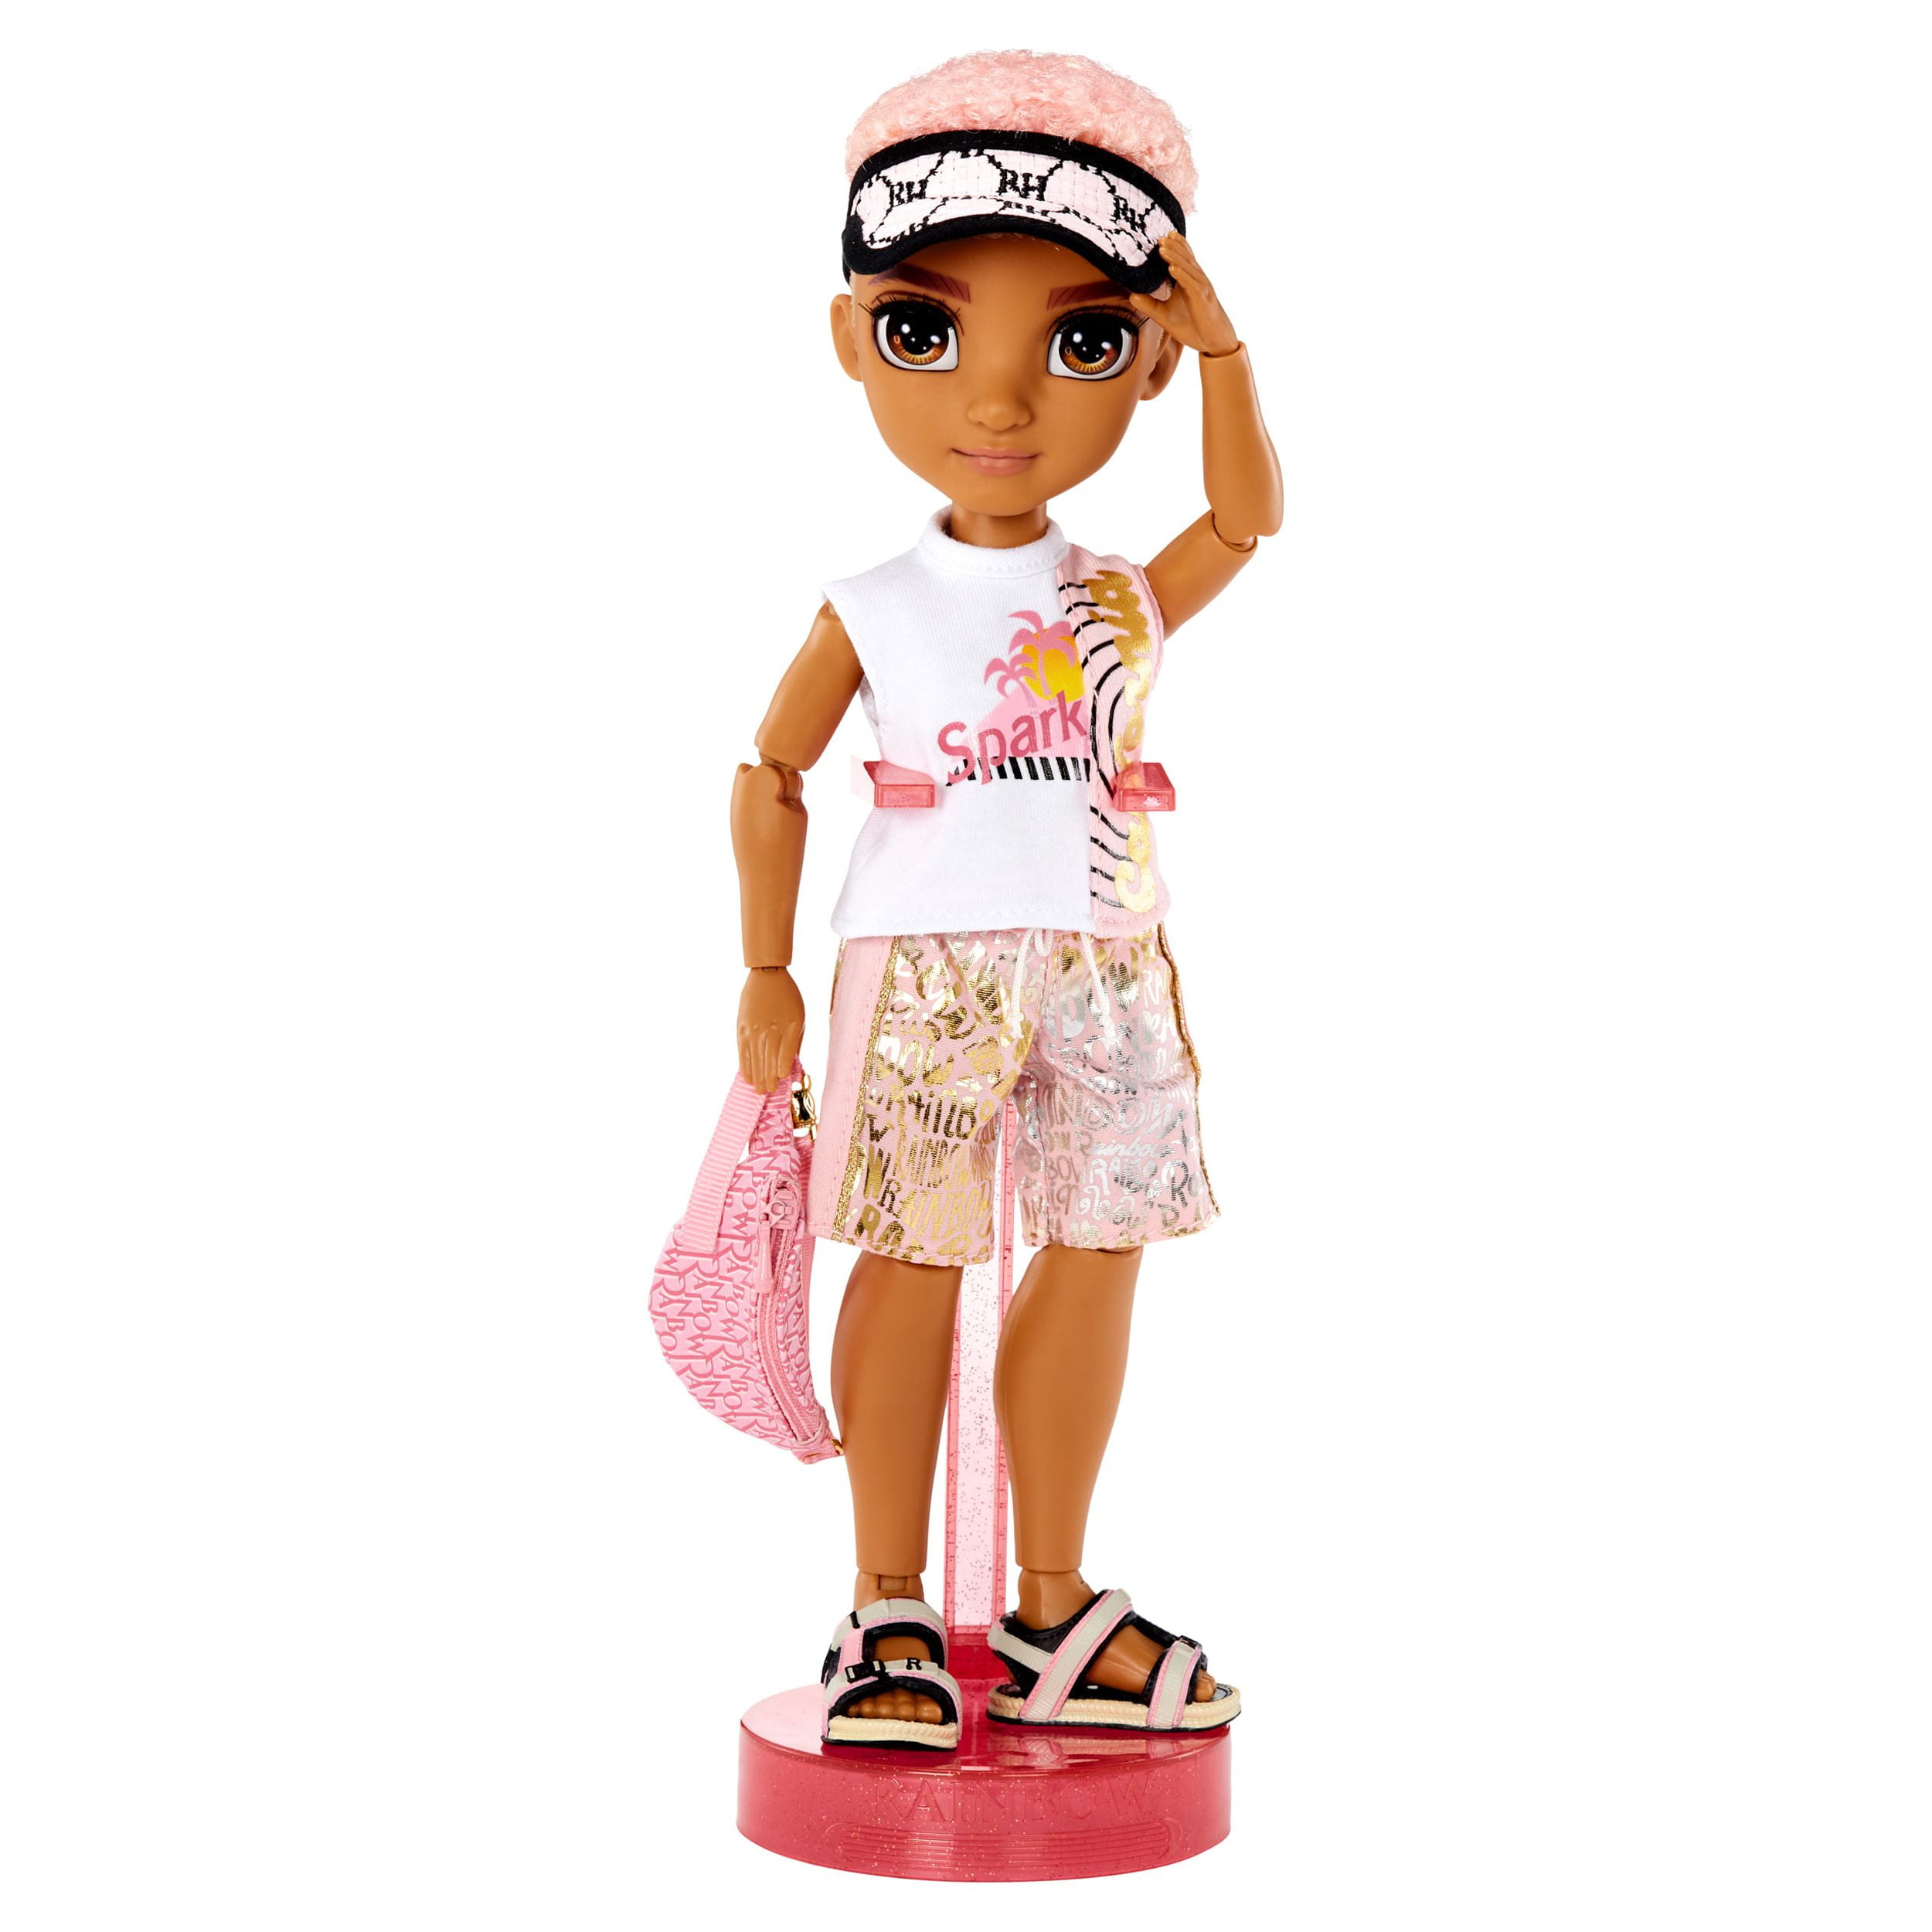 Rainbow High Pacific Coast Finn Rosado- Rose Gold Boy Fashion Doll with Pool Accessories Playset, and Surfboard. Great Gift for